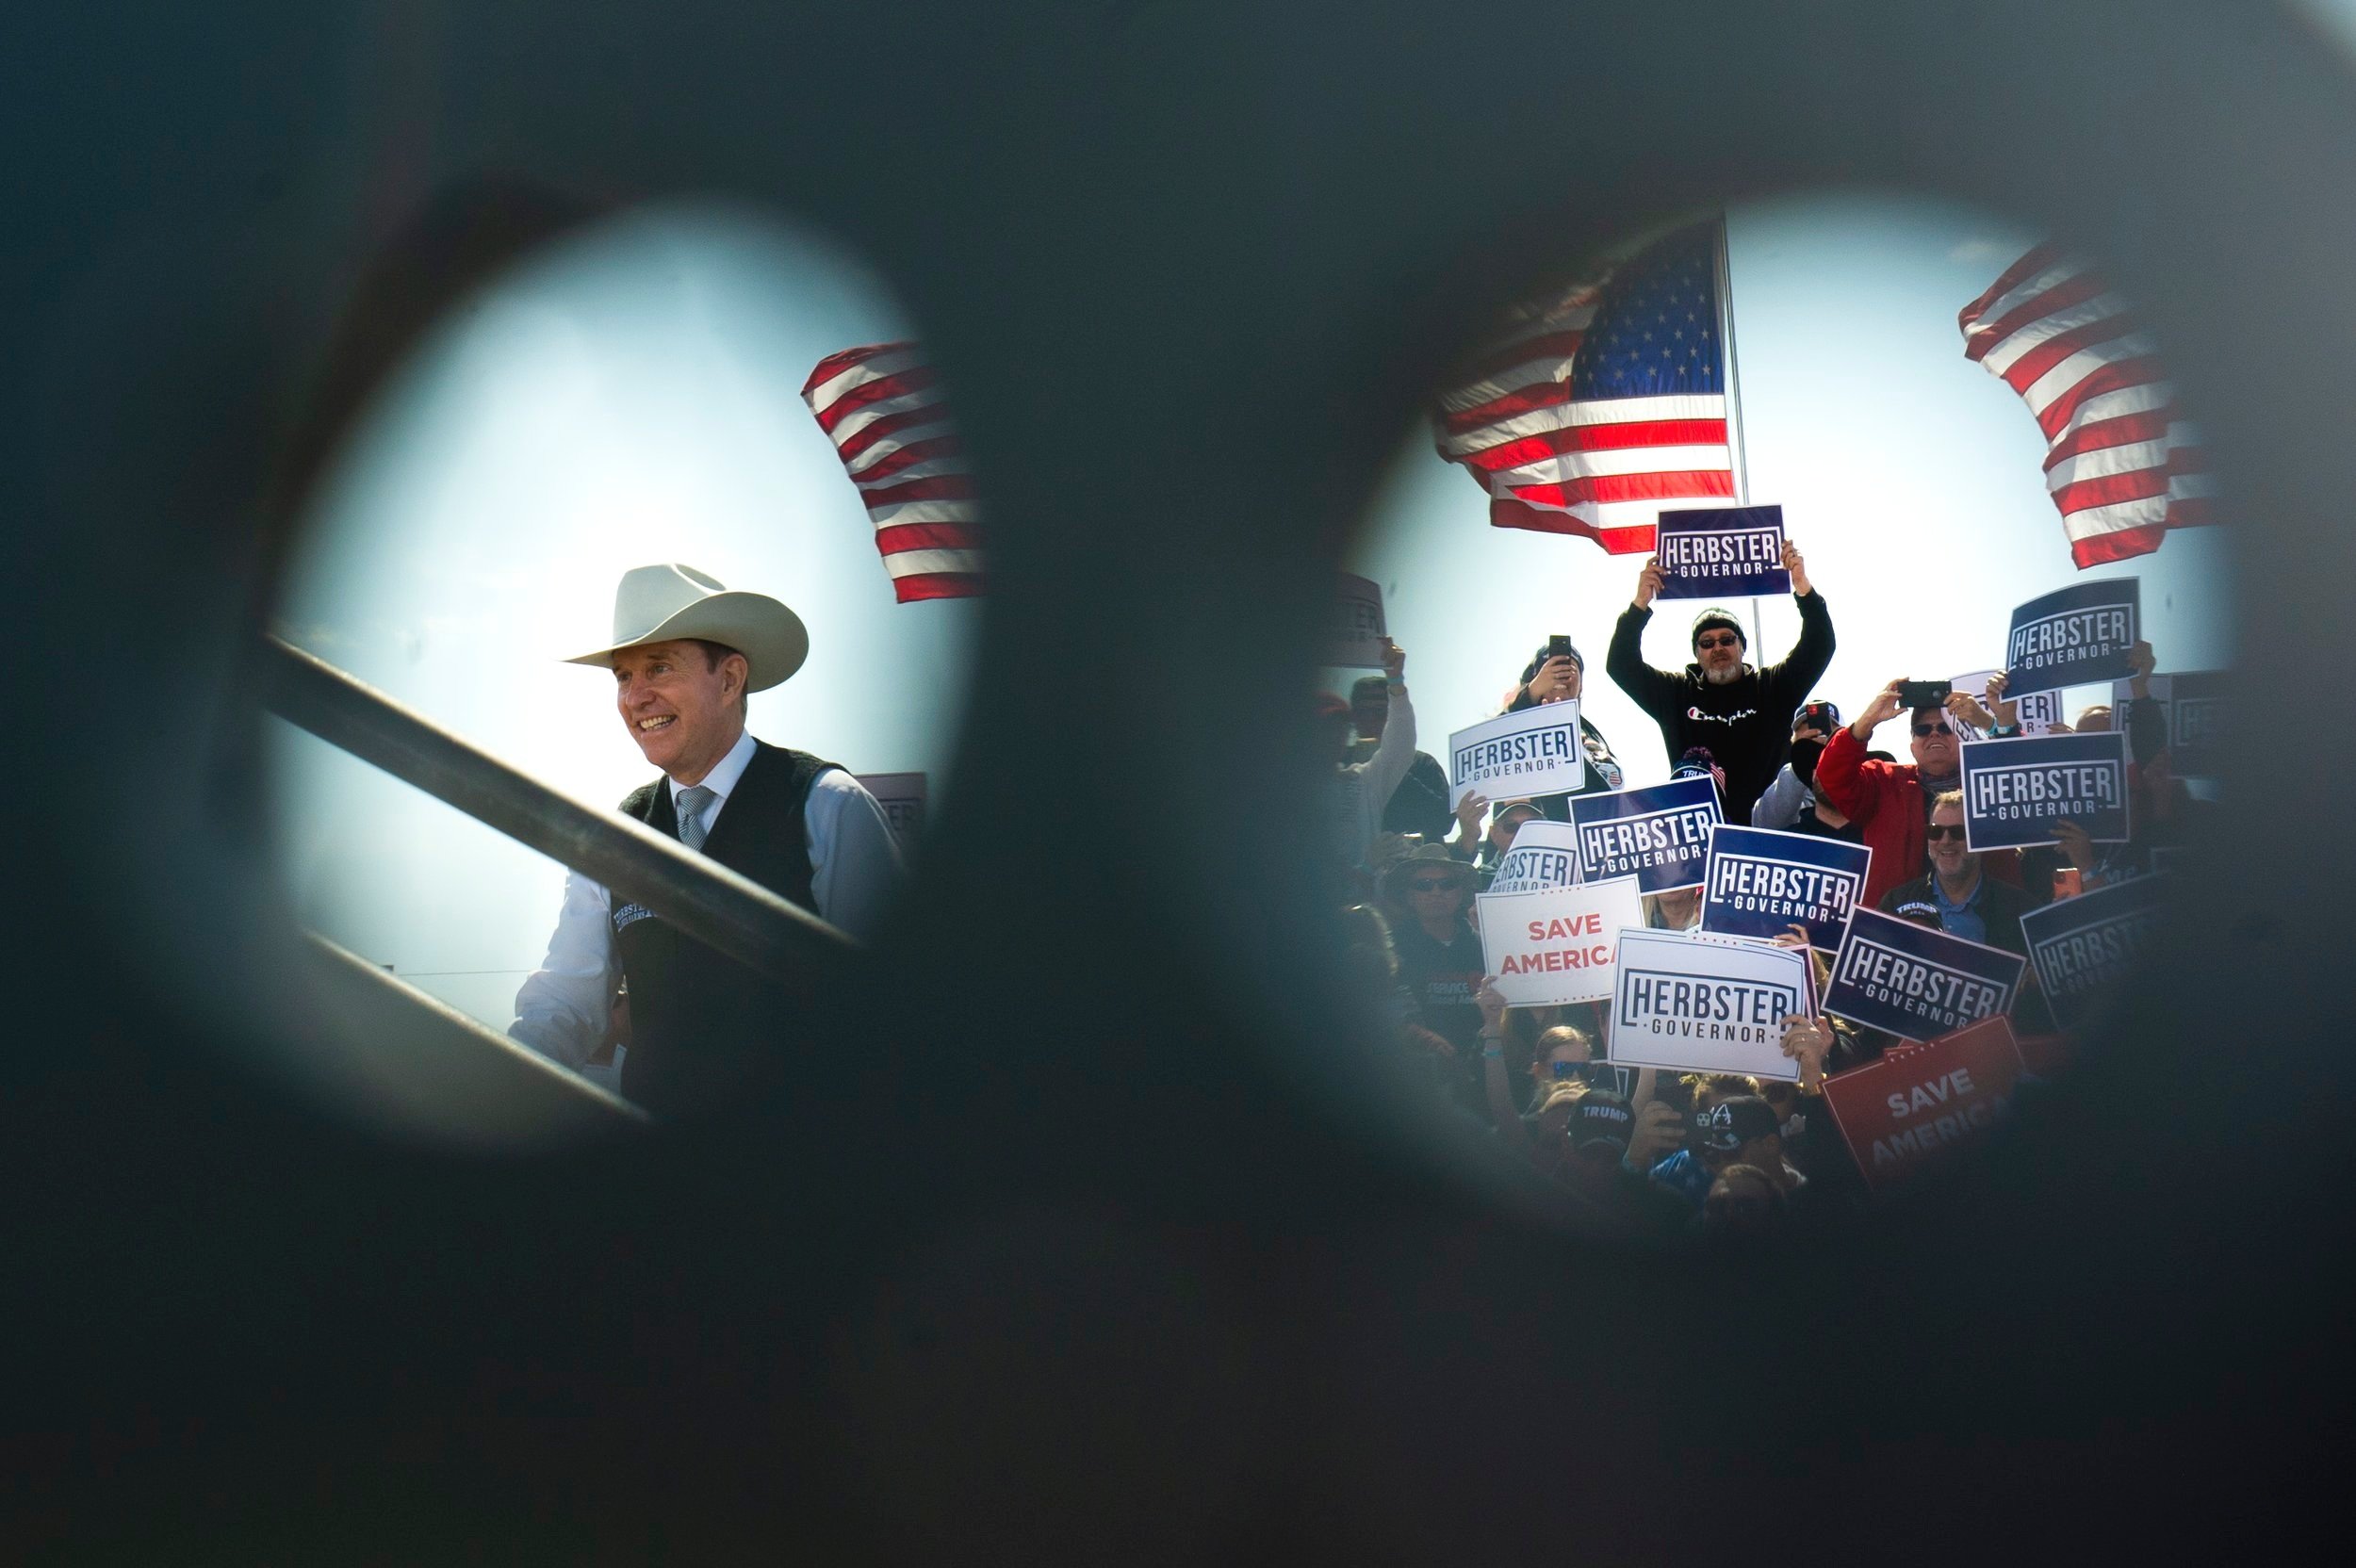  As seen through open cable holders, avid supporters of Gubernatorial candidate Charles Herbster and former president Donald Trump cheer as Herbster takes the stage during a Trump rally for Charles Herbster at the I-80 Speedway on May 1, 2022, in Gre